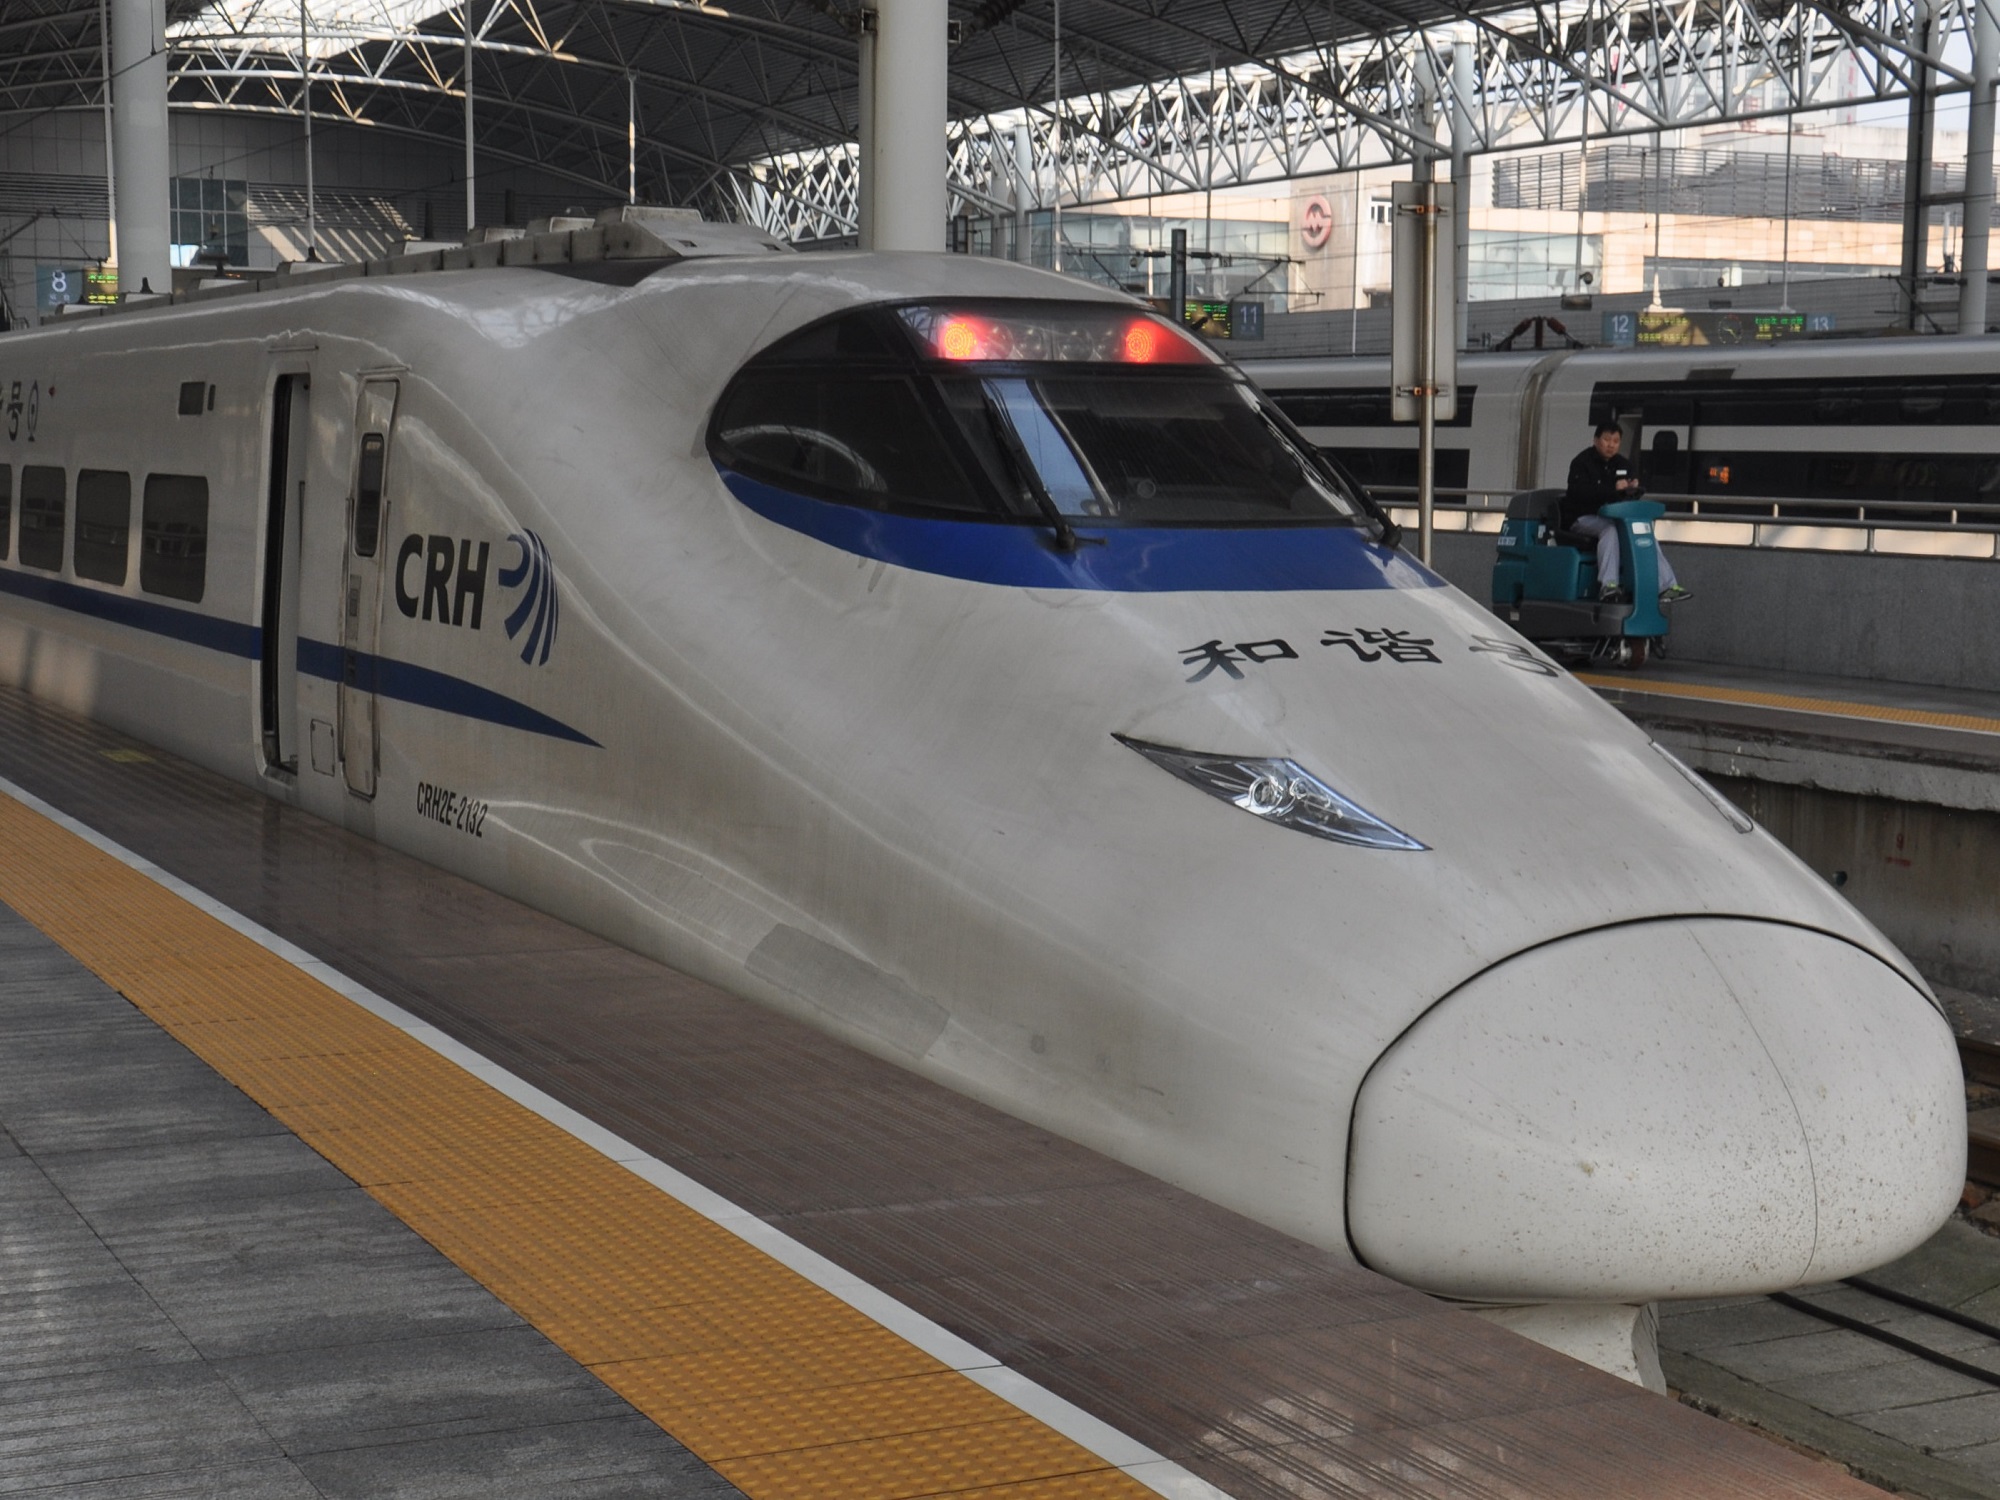 My high-speed sleeper train, forming the D321 service, waiting on Platform 5 at Beijing South Station to take me to Shanghai.